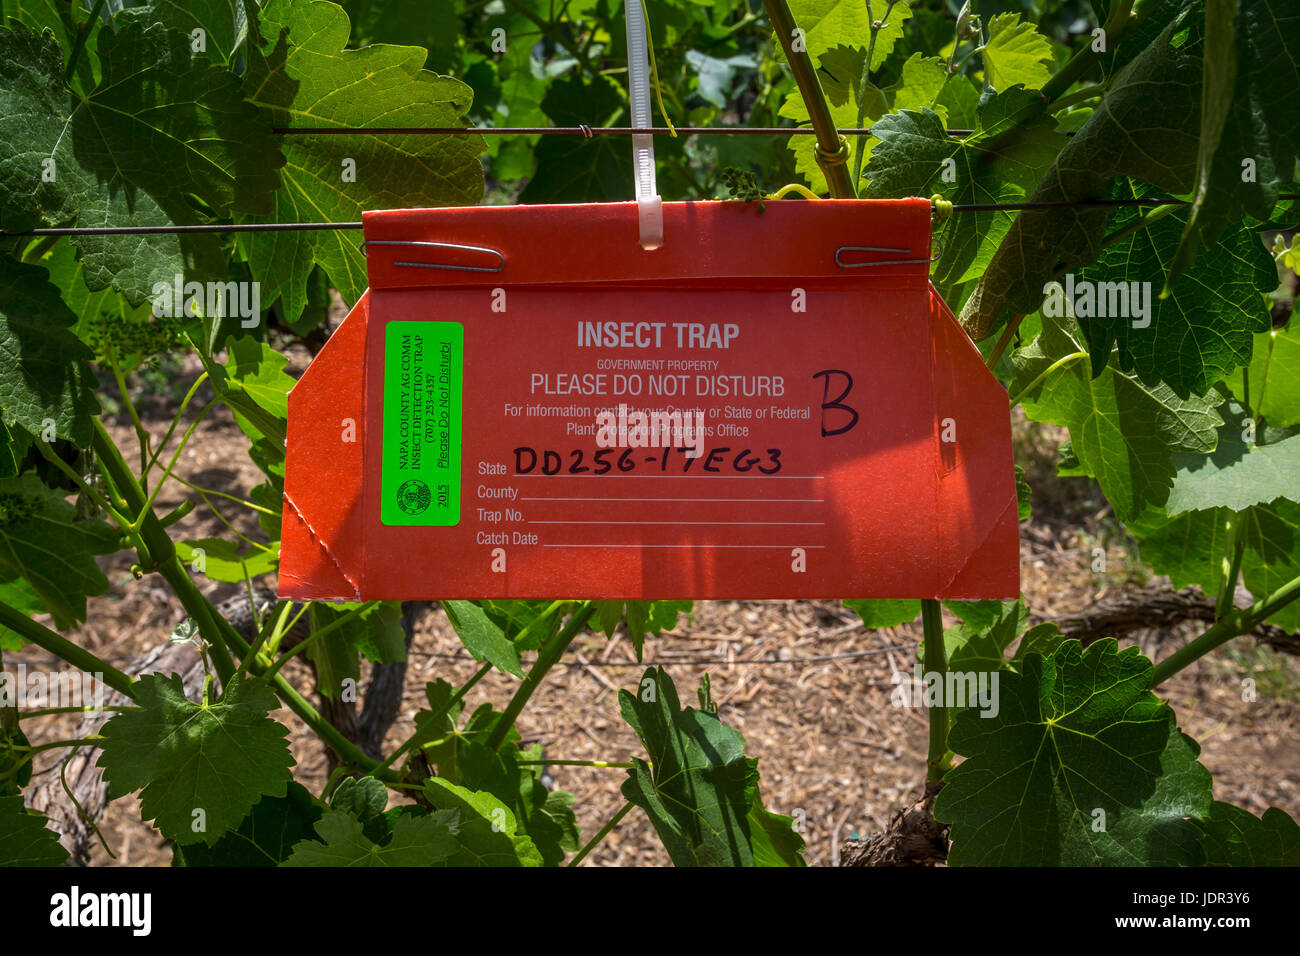 insect trap, insect detection trap, grape vineyard, vineyard, vineyards, Fortunati Vineyards, Napa, Napa Valley, California, United States Stock Photo